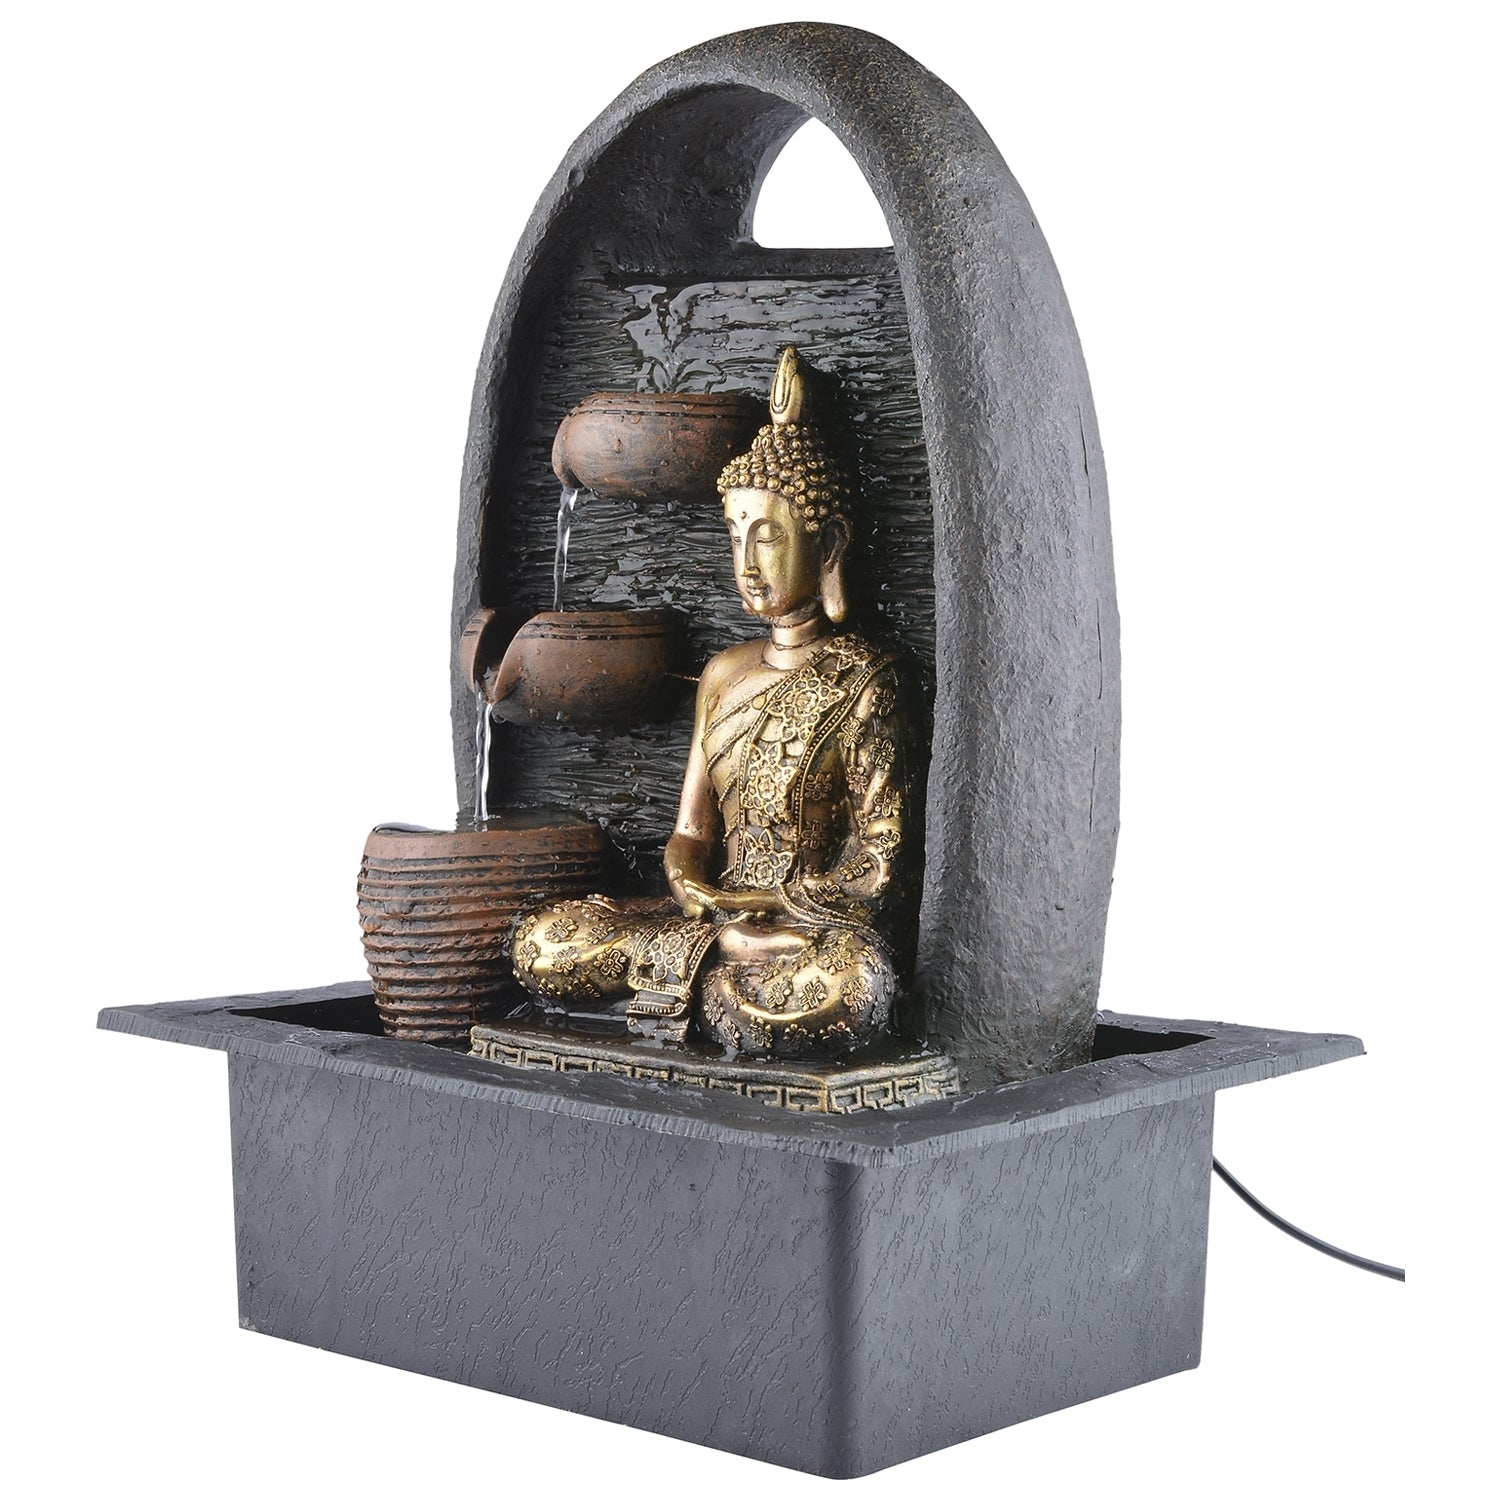 Meditating Lord Buddha Water Fountain For Home 2